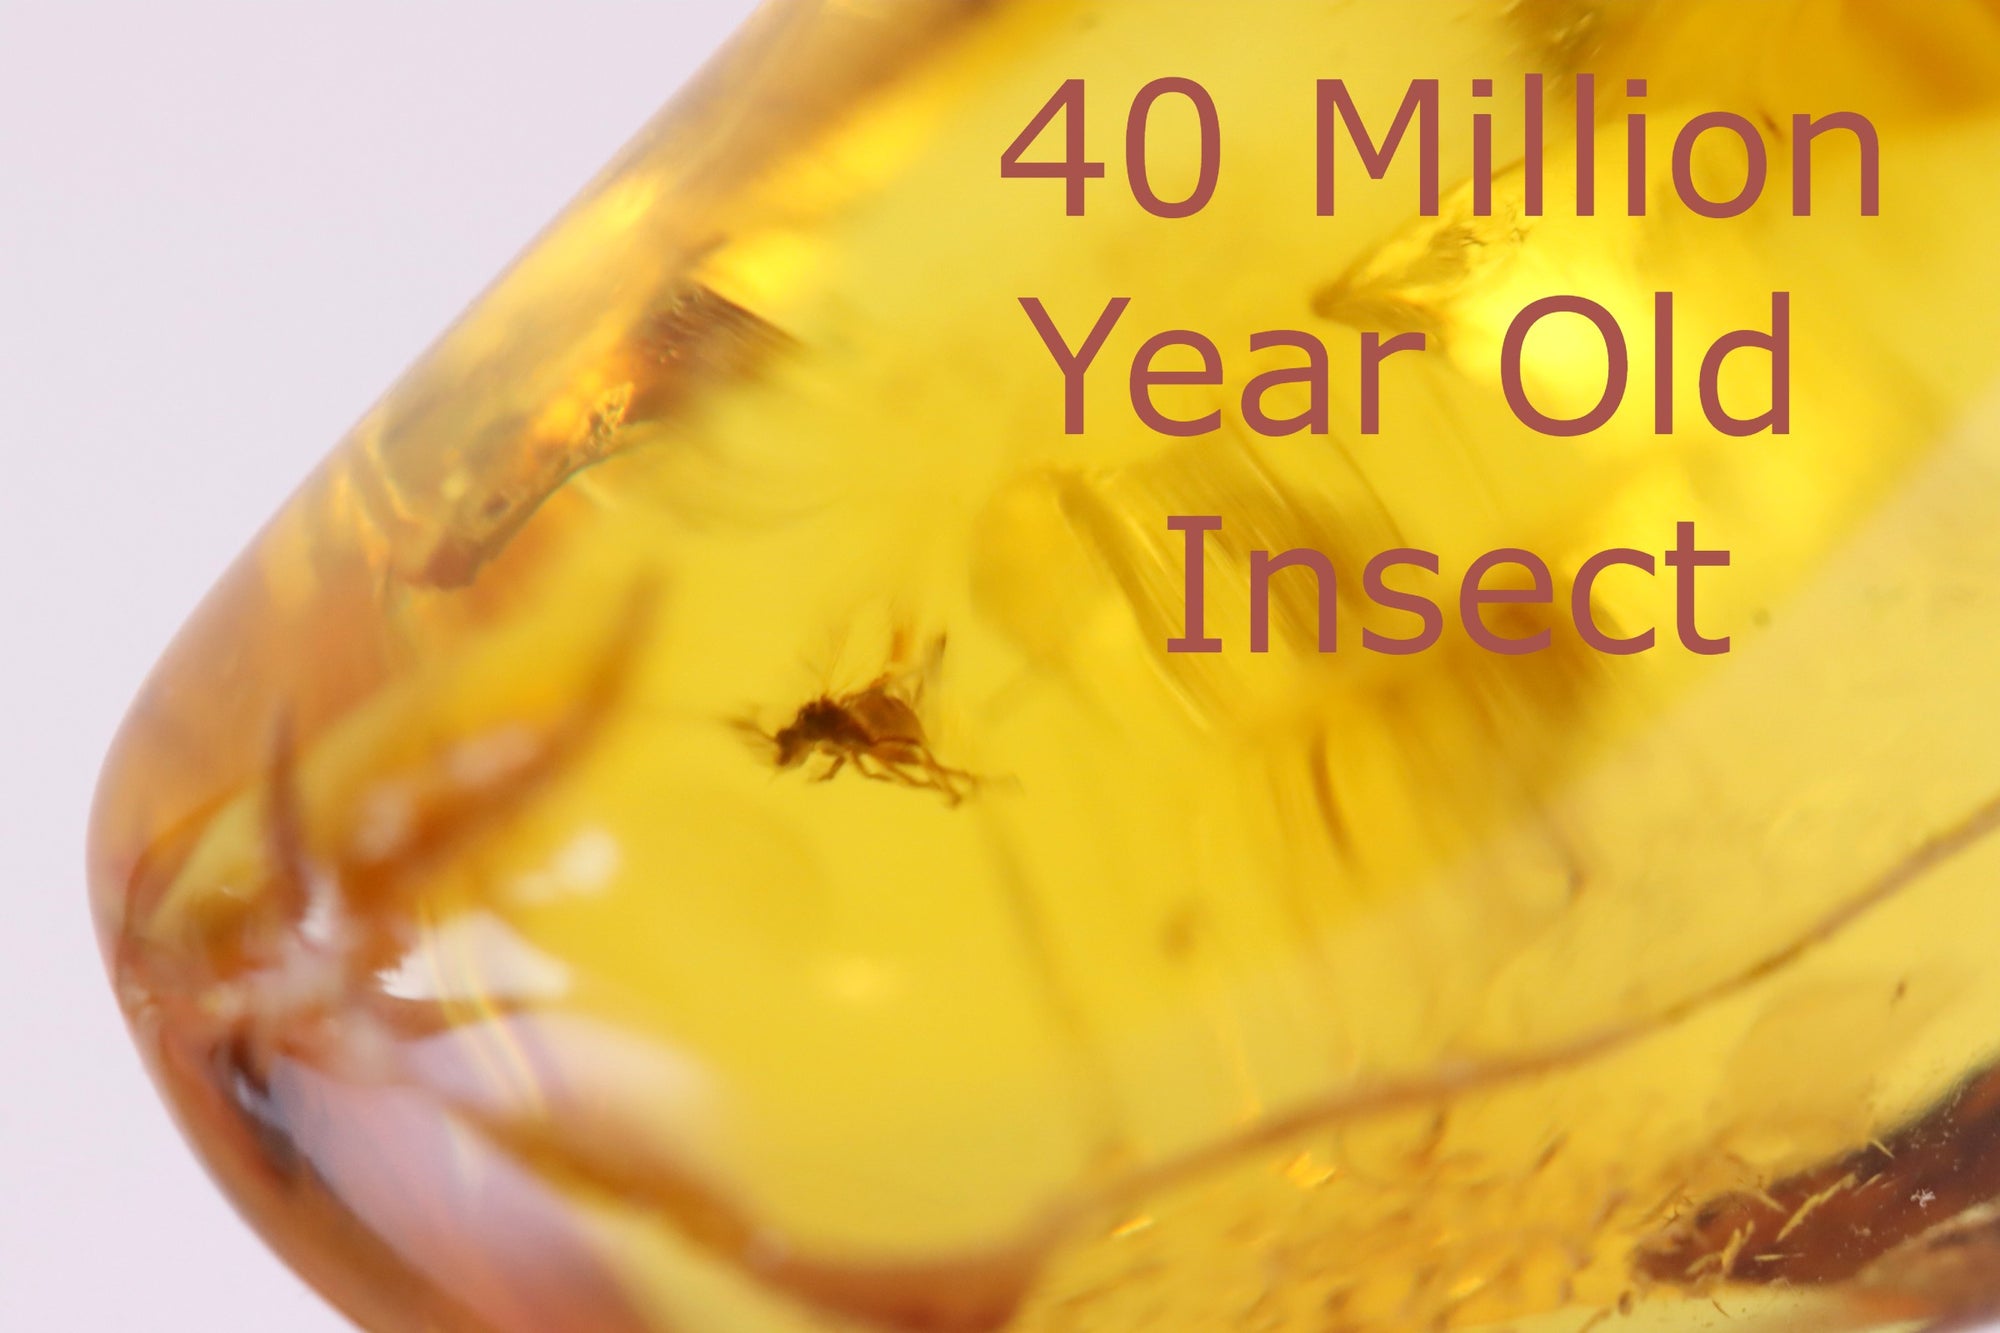 40 million year old Insect in Baltic Amber Amulet